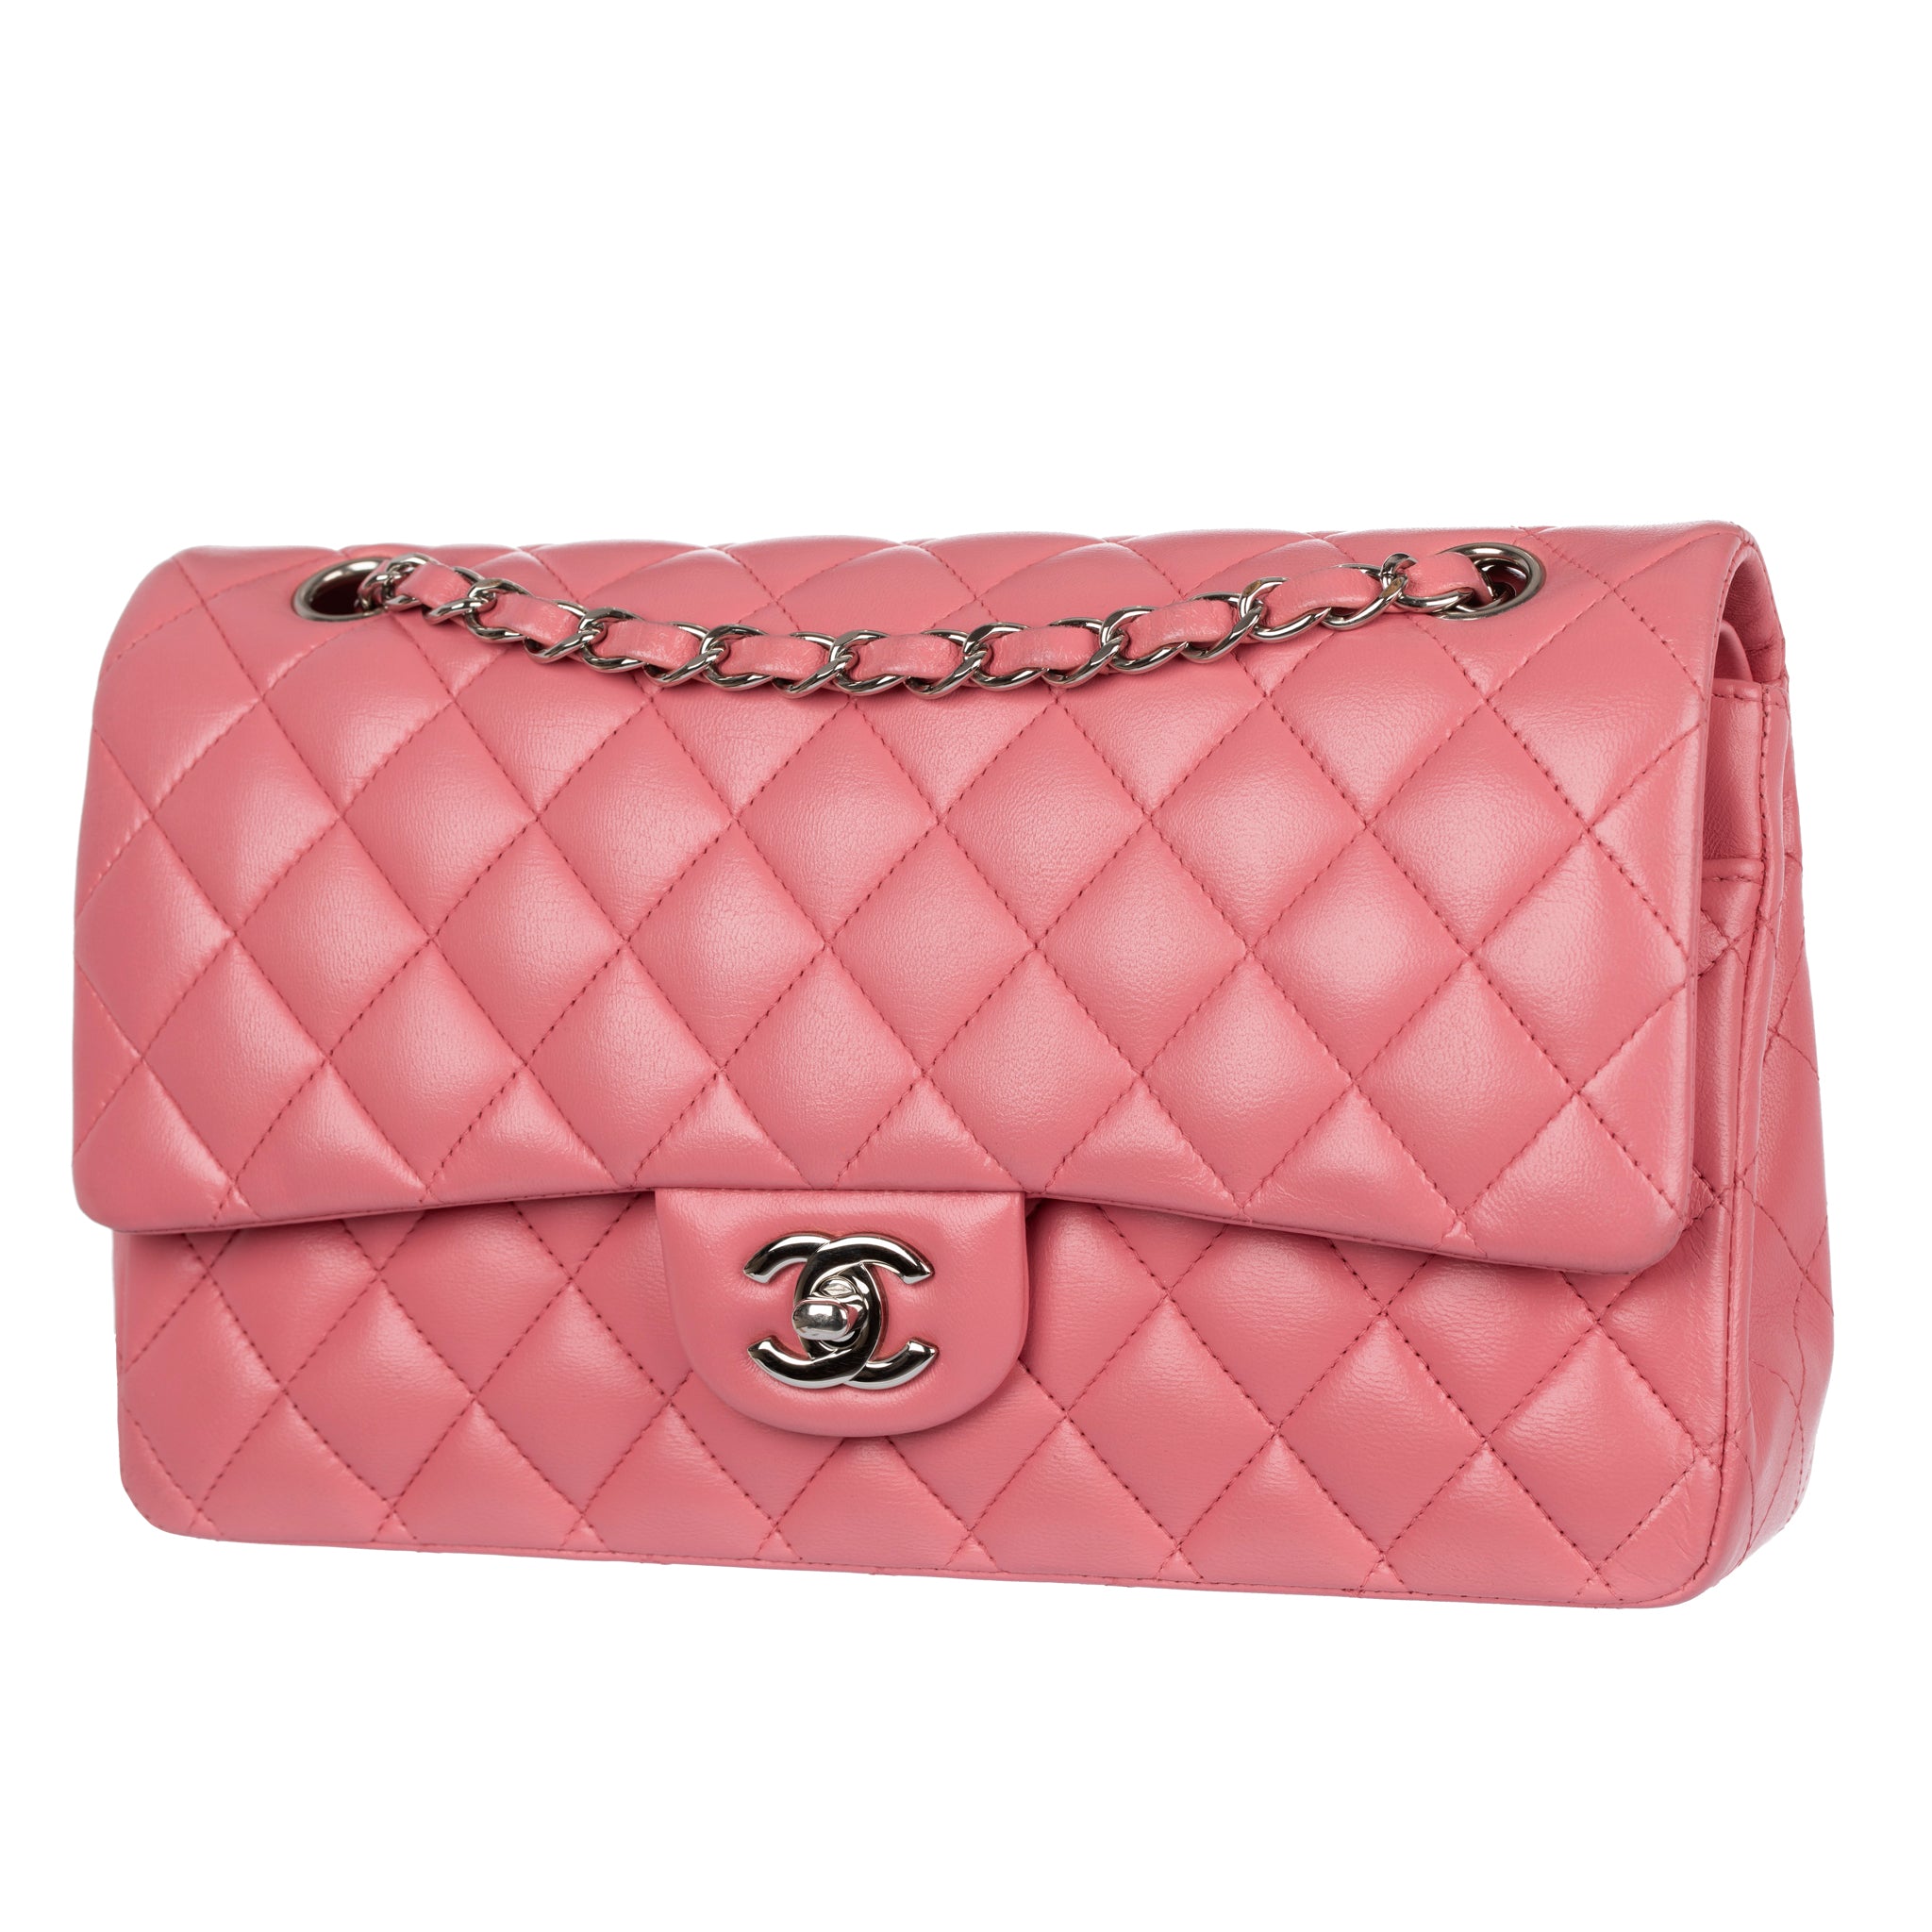 Chanel Medium Double Classic Flap Bag Pink Lambskin Leather Gold Tone Hardware